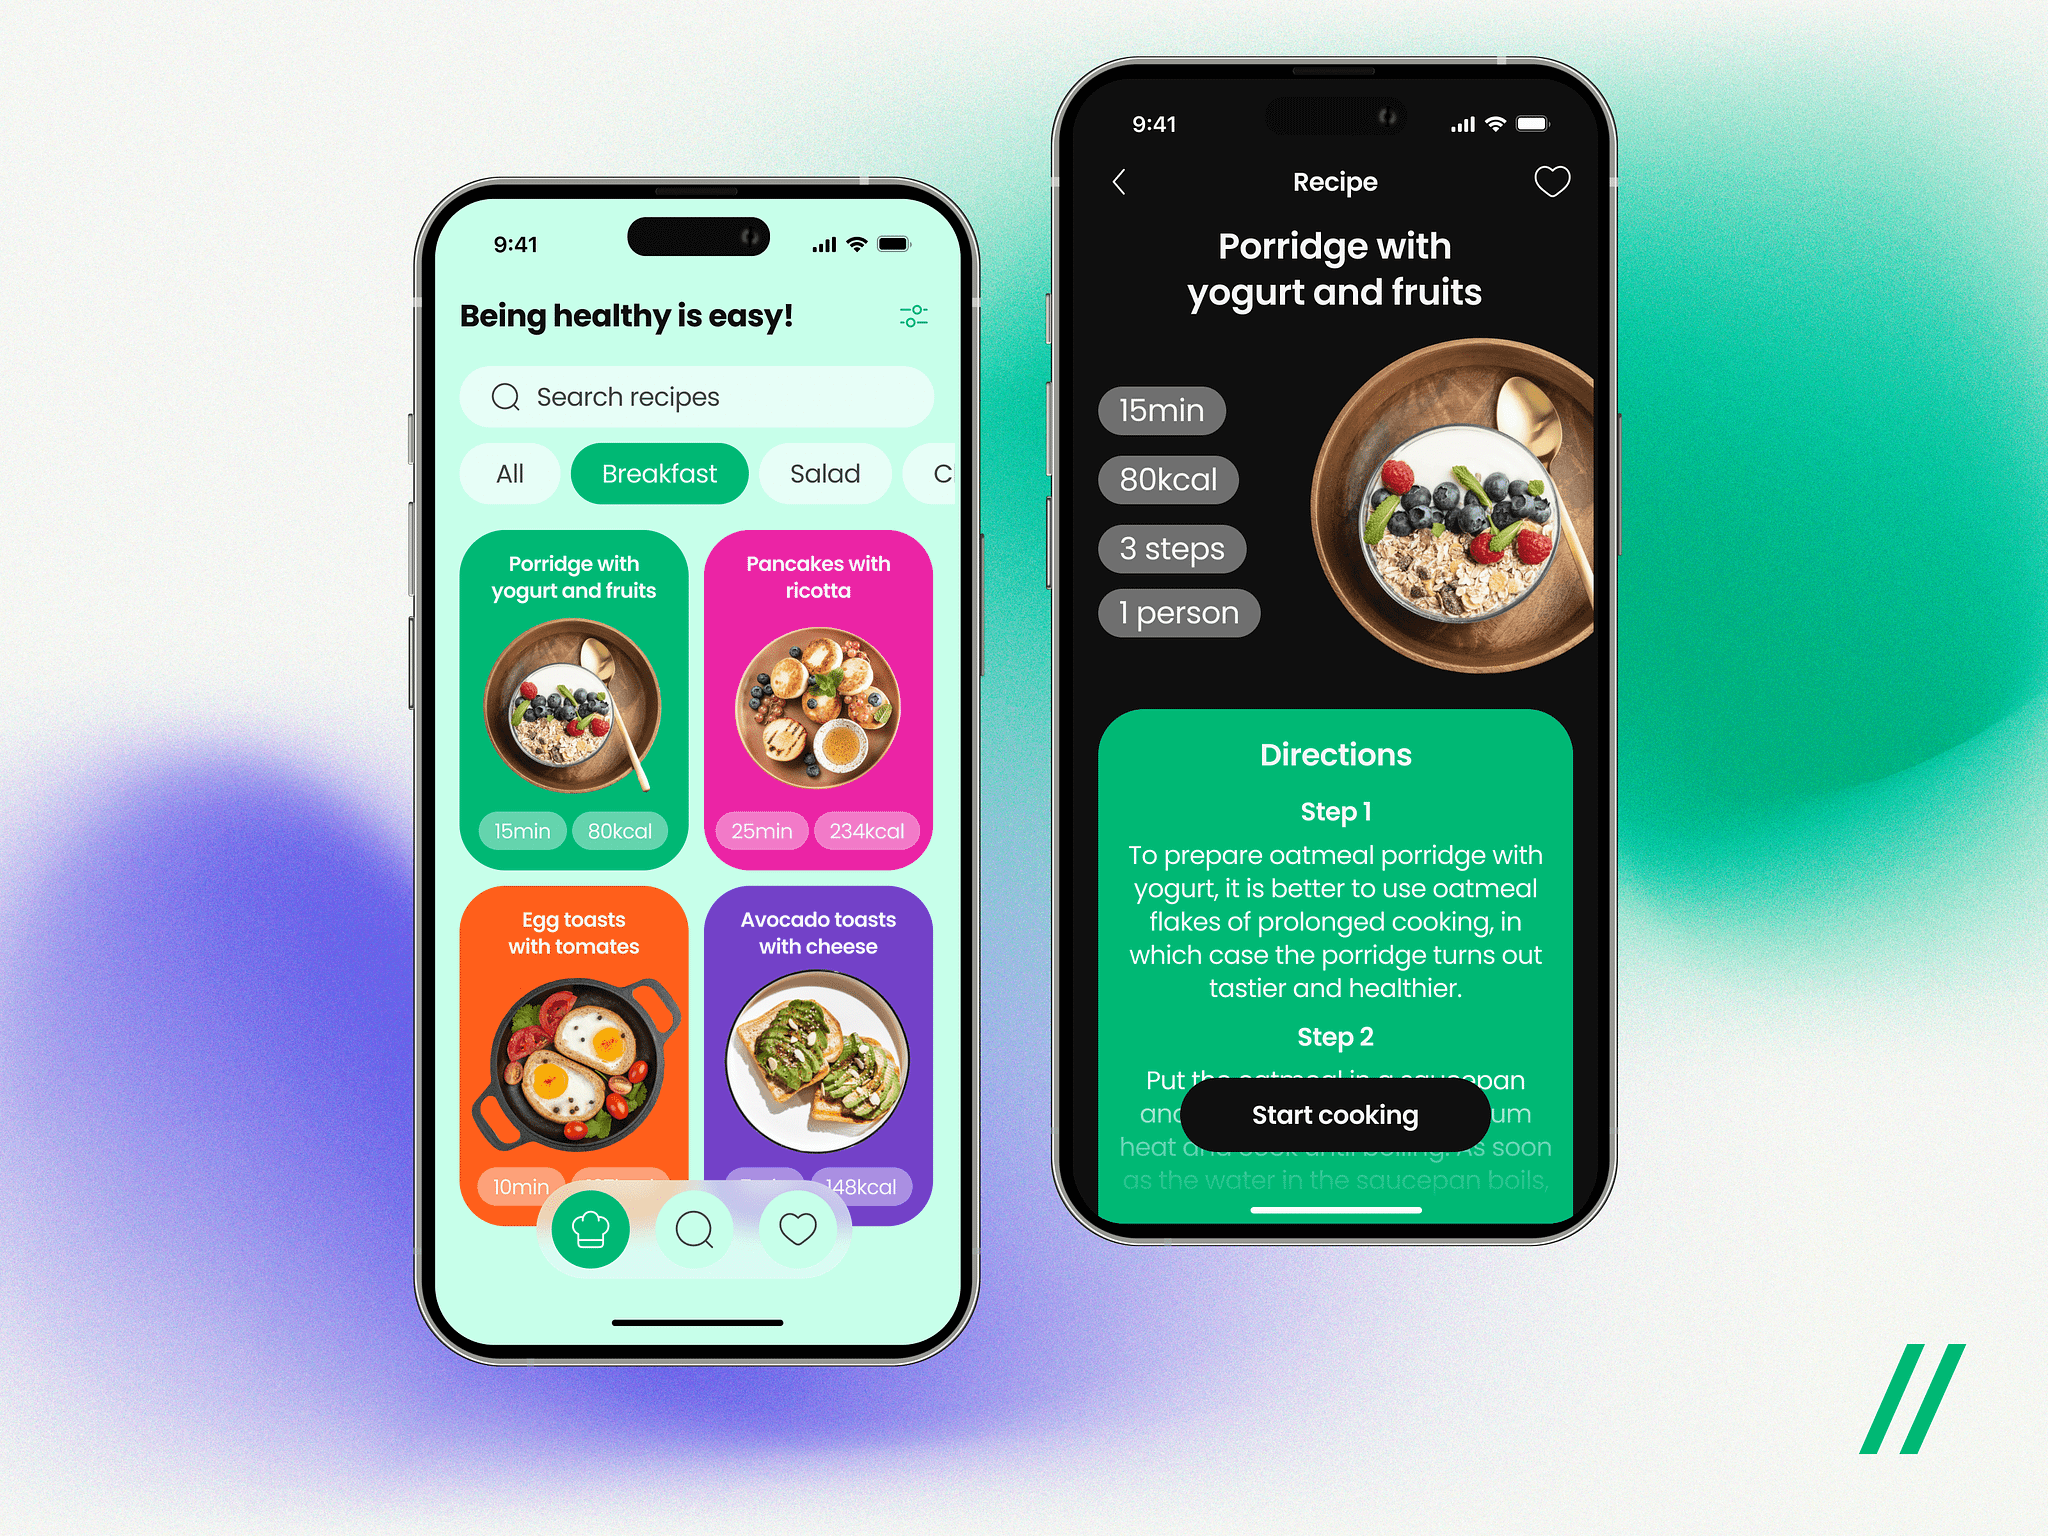 An example of a healthy recipe app that encourages users to eat healthy food by providing a variety of delicious recipes to diversify their daily menu.